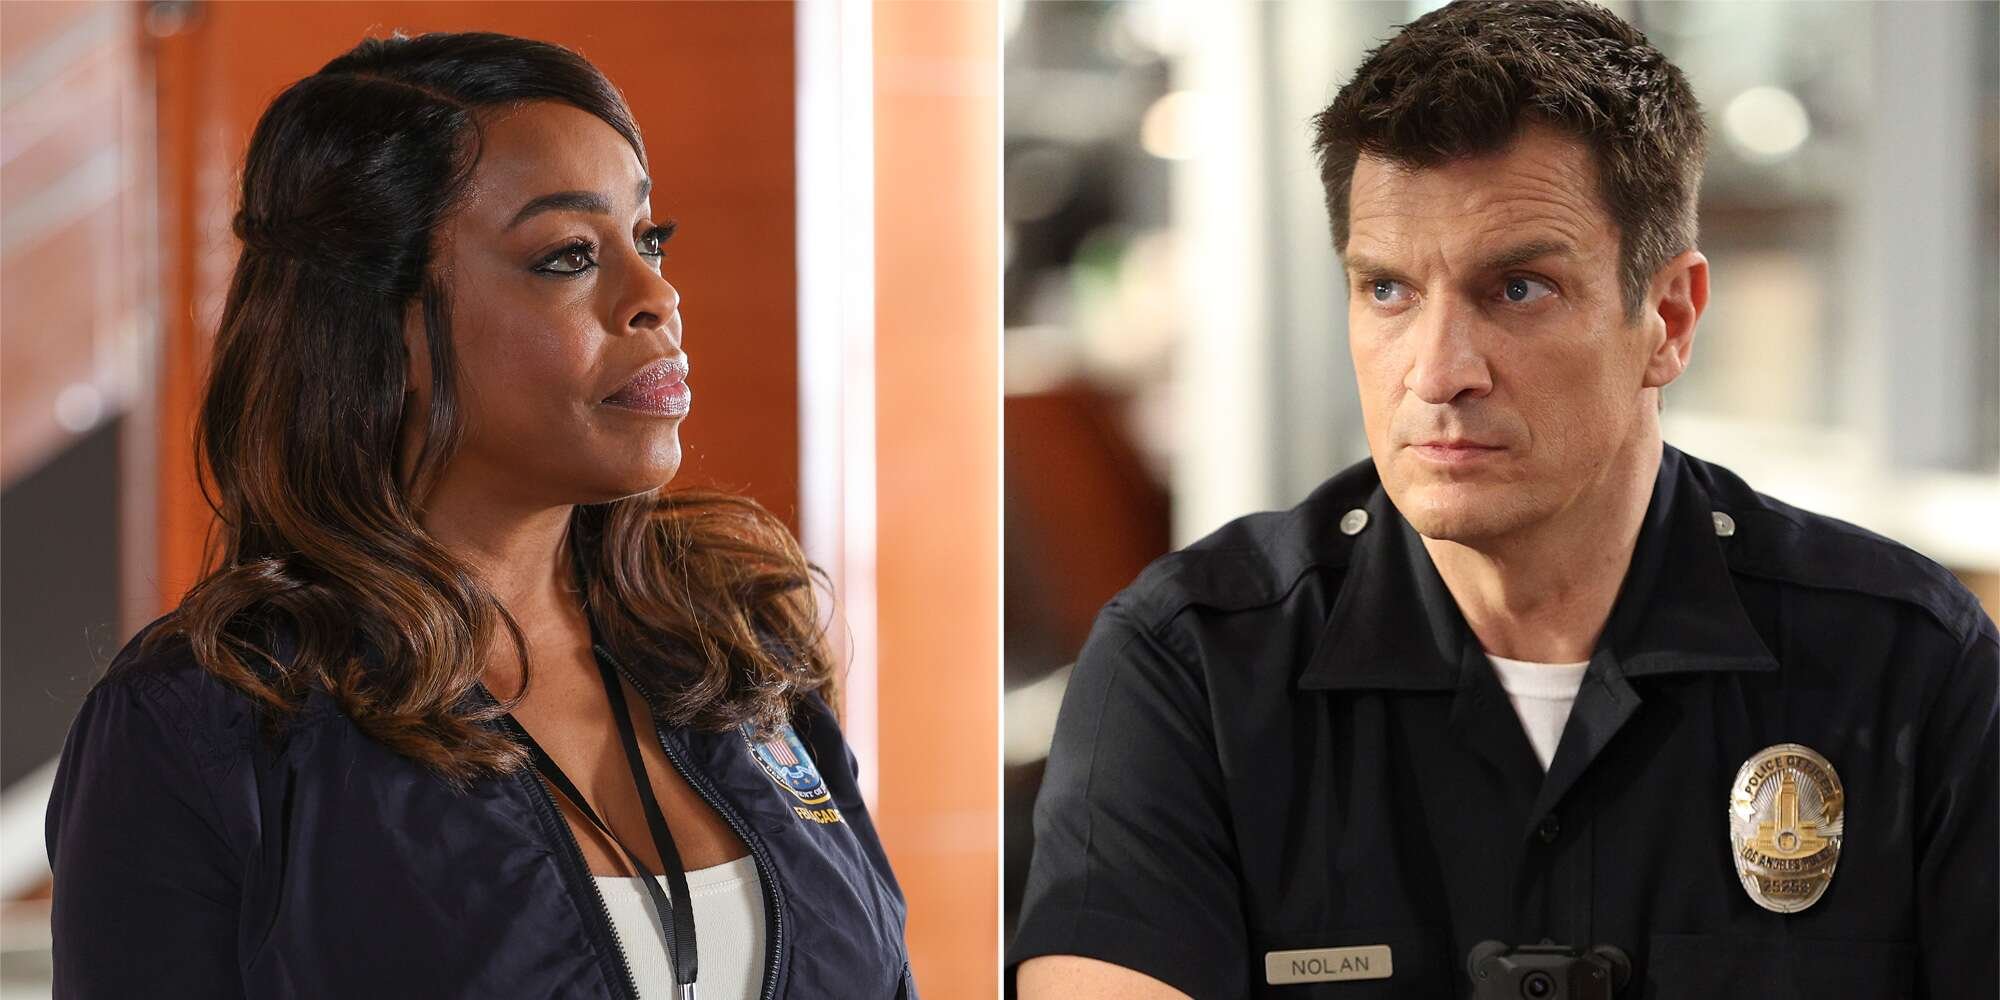 John Nolan will become a training officer in season 5 of The Rookie